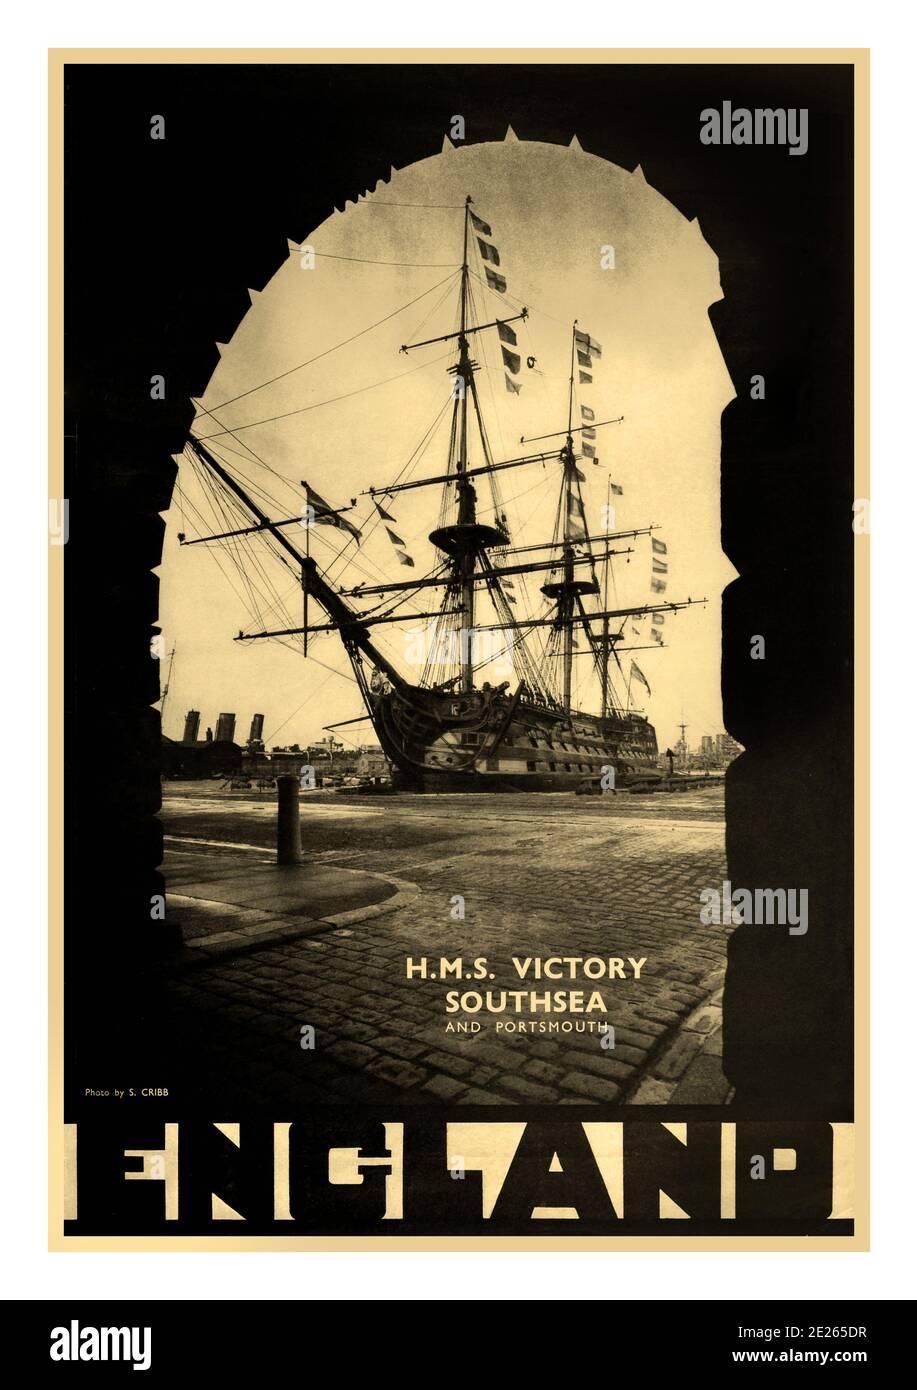 HMS VICTORY 1930’s vintage travel advertising poster for HMS Victory - Southsea and Portsmouth - England - monotone photo by S. Cribb features the HMS Victory framed by a brick archway with a black border and stylised lettering. UK, designer: S. Cribb, 1930s Stock Photo